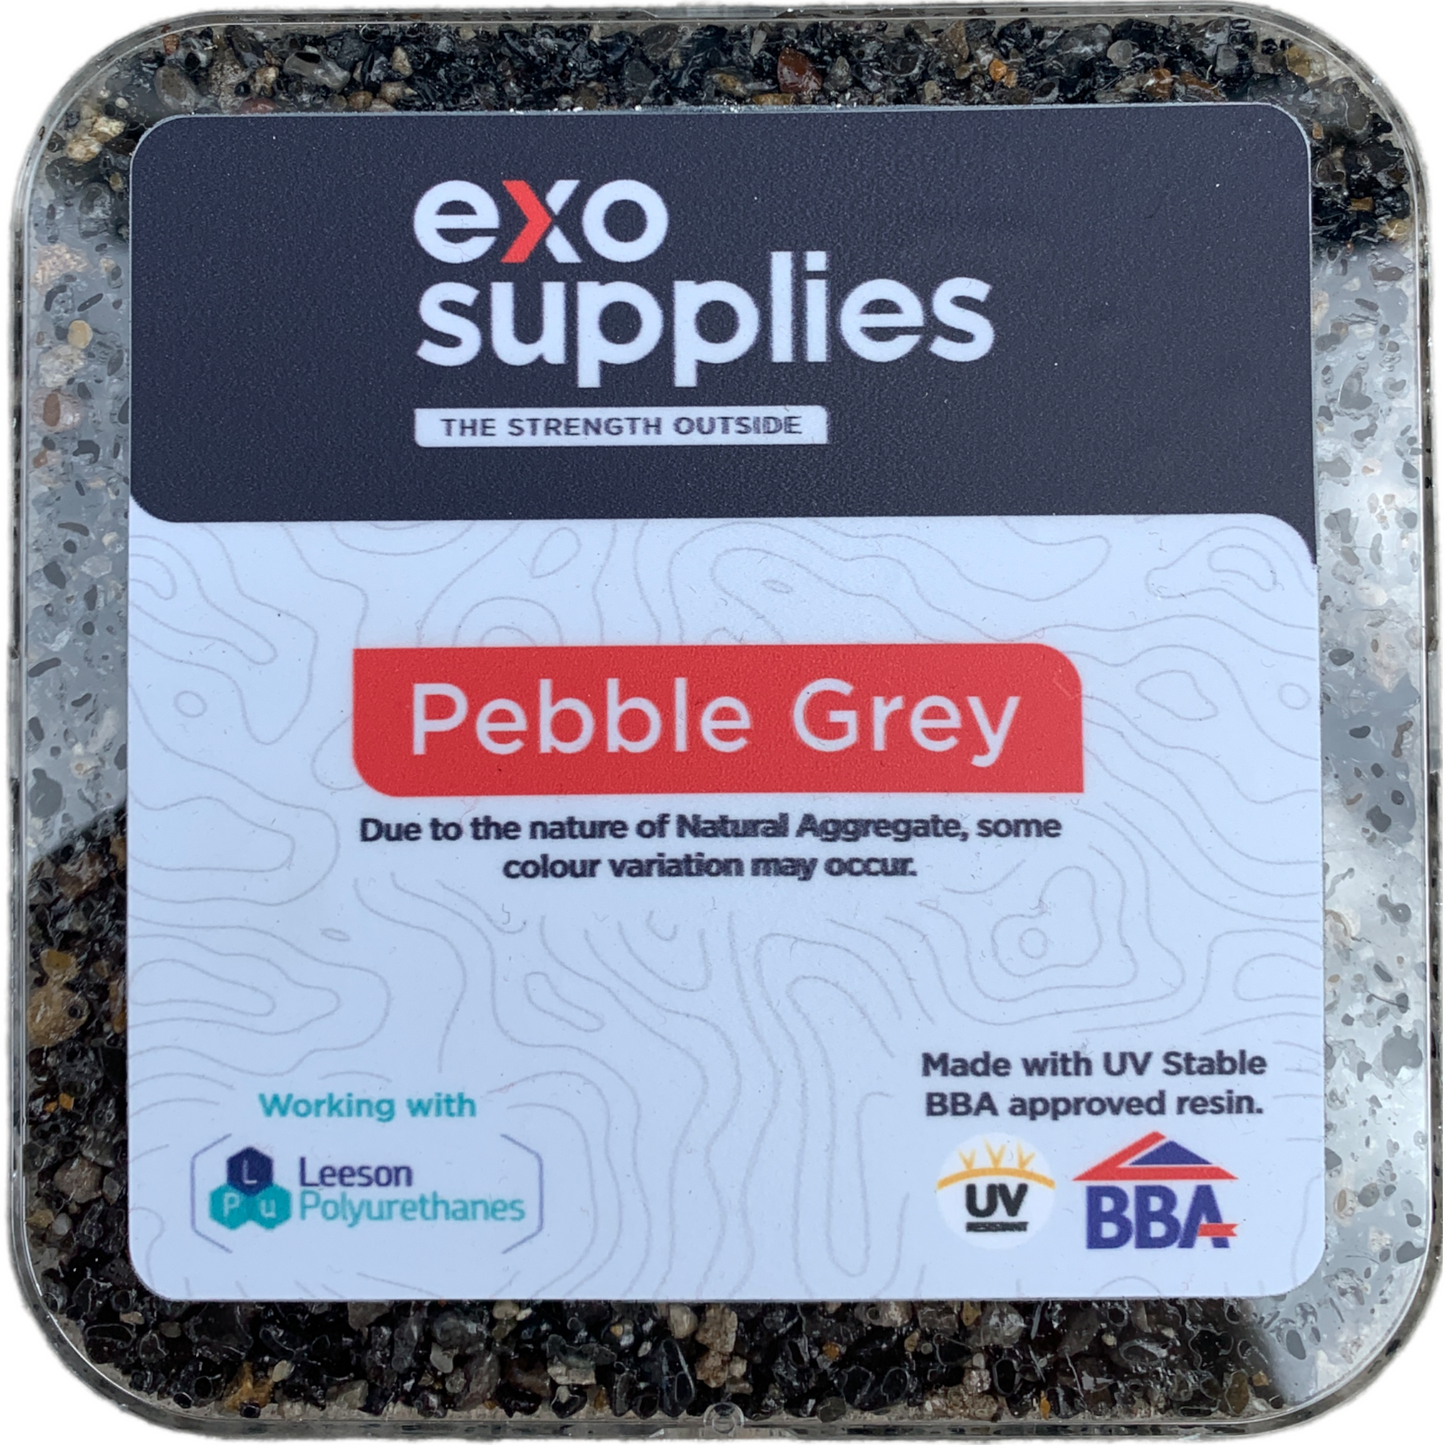 Exo Pebble Grey with BBA 7.5kg UV stable Resin